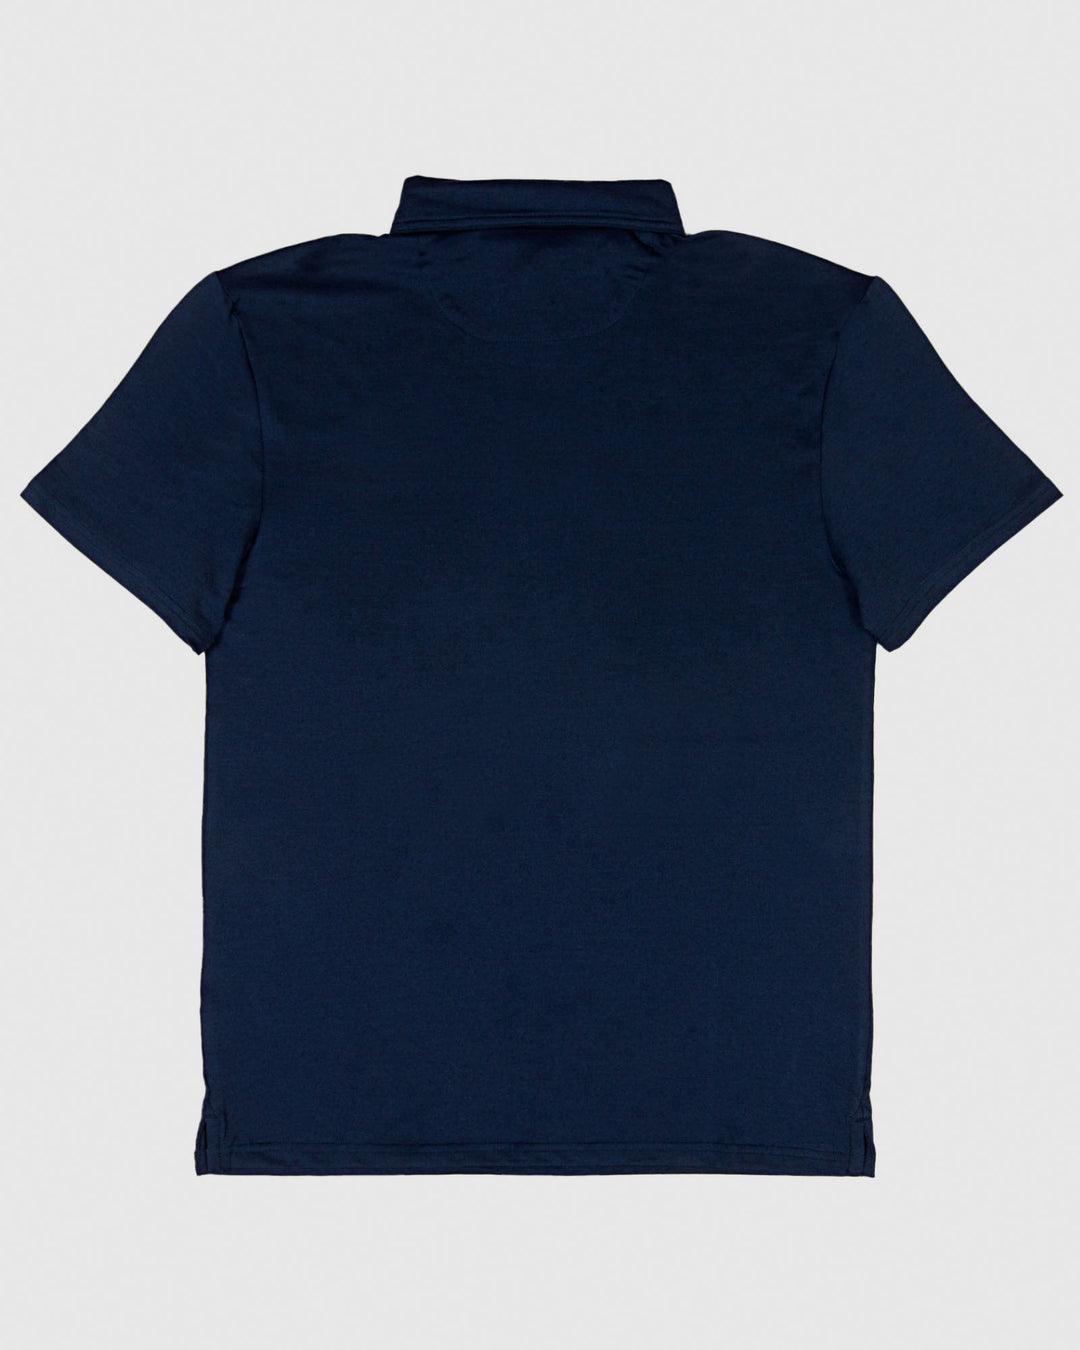 Back of navy polo